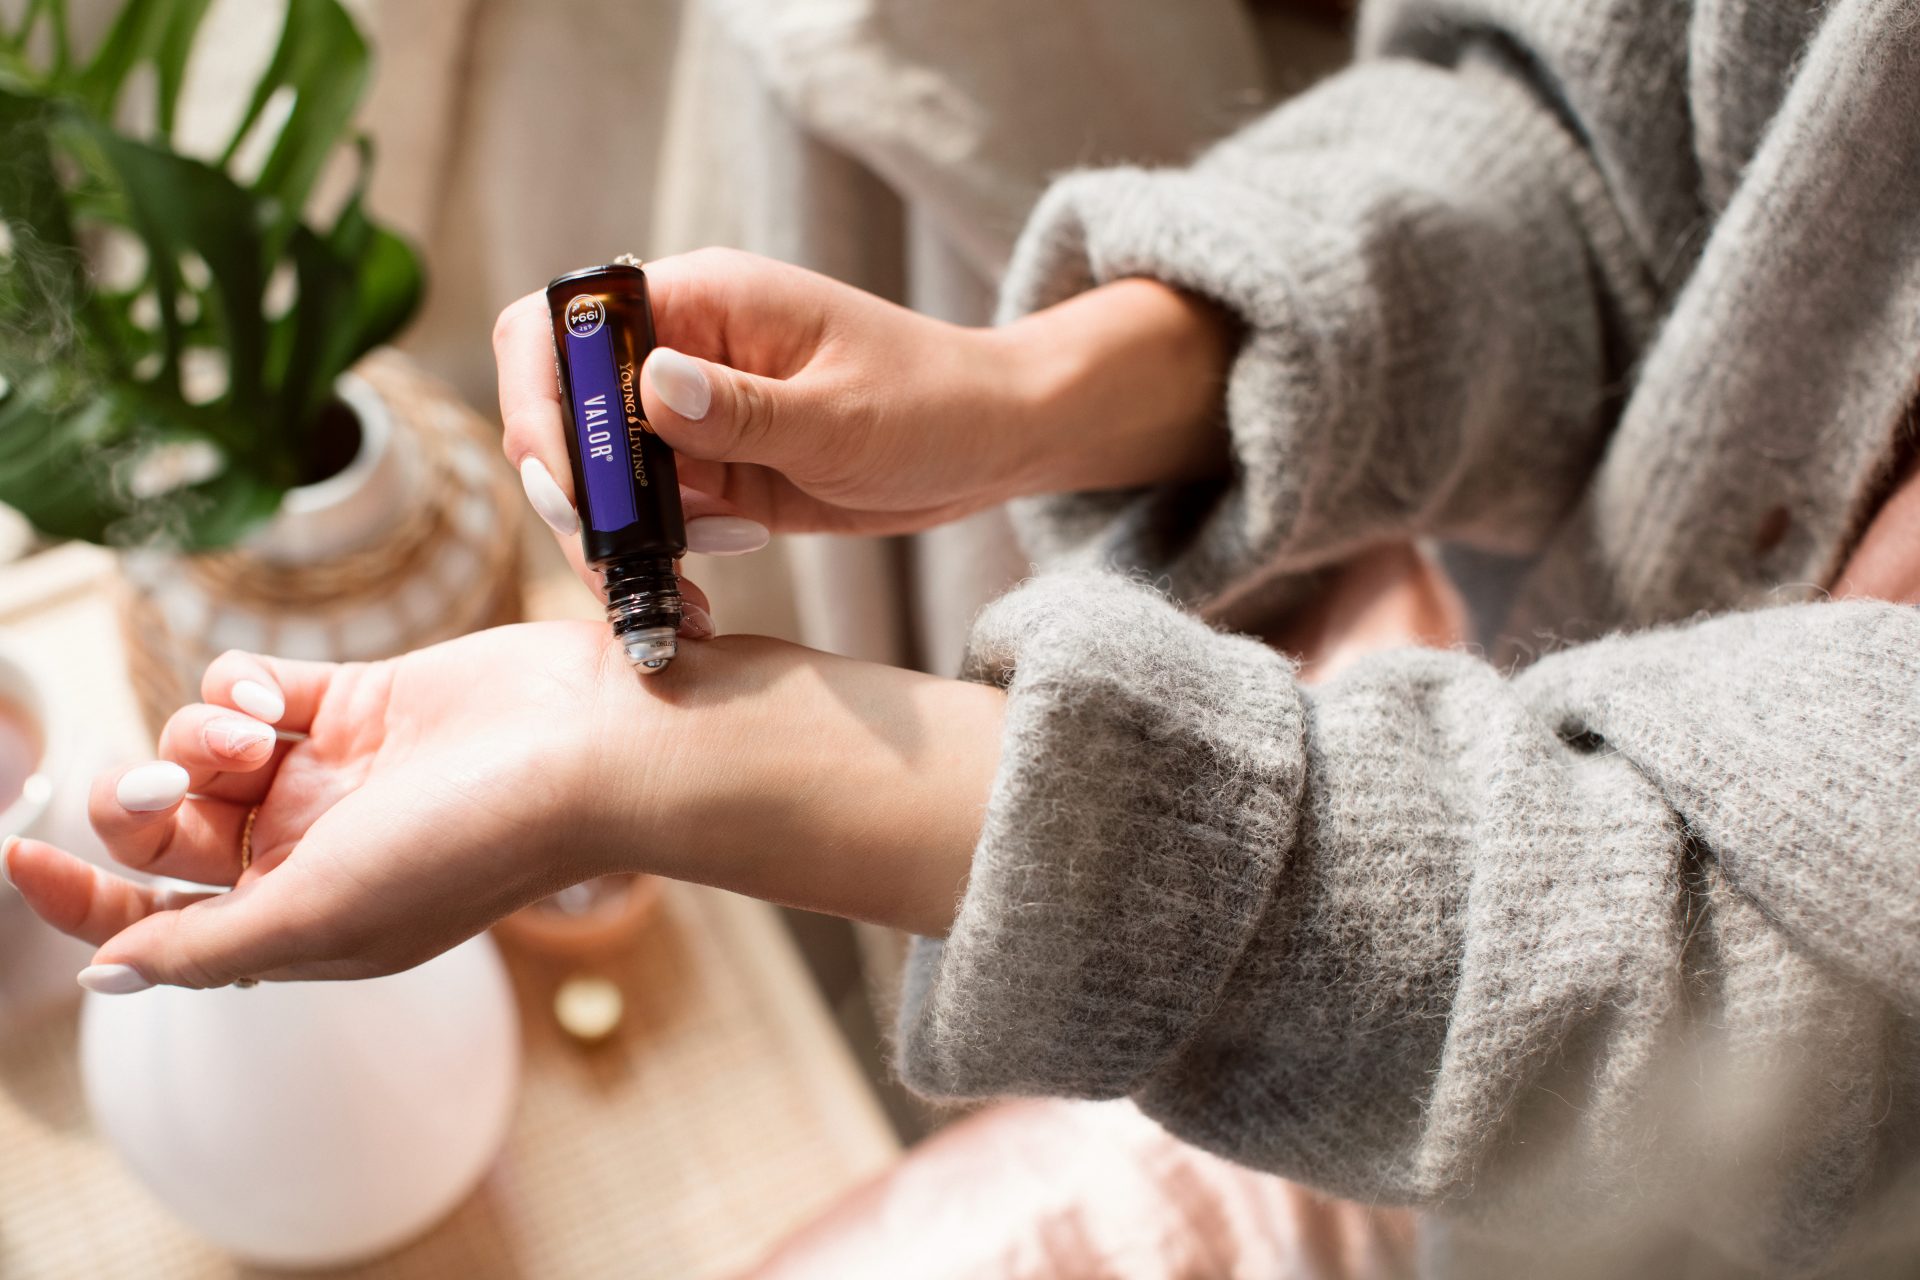 Young Living essential oil Valor roller being applied to wrist